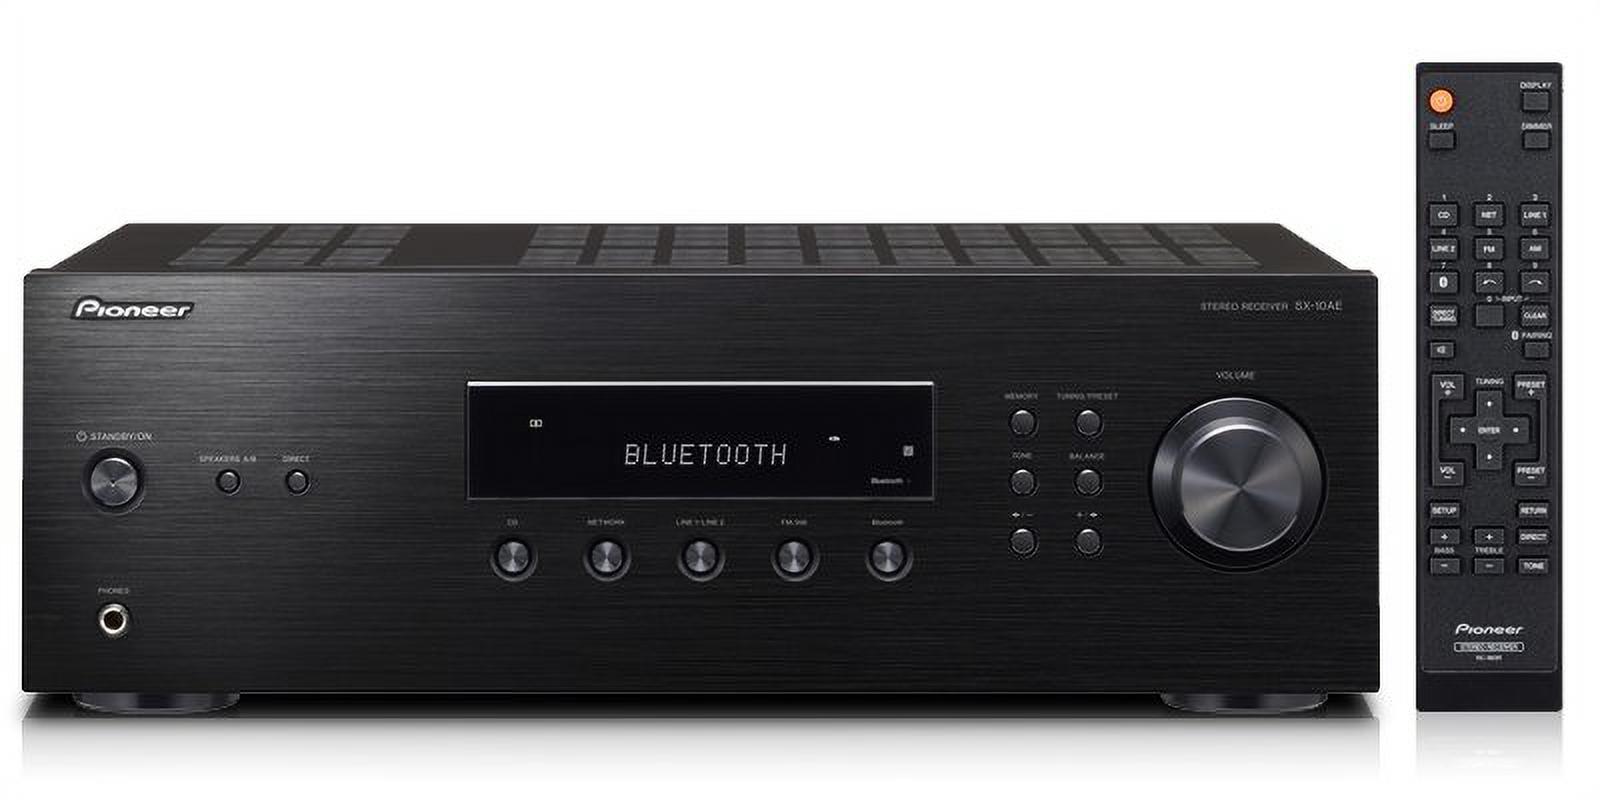 Pioneer SX-10AE Stereo Receiver - image 1 of 2